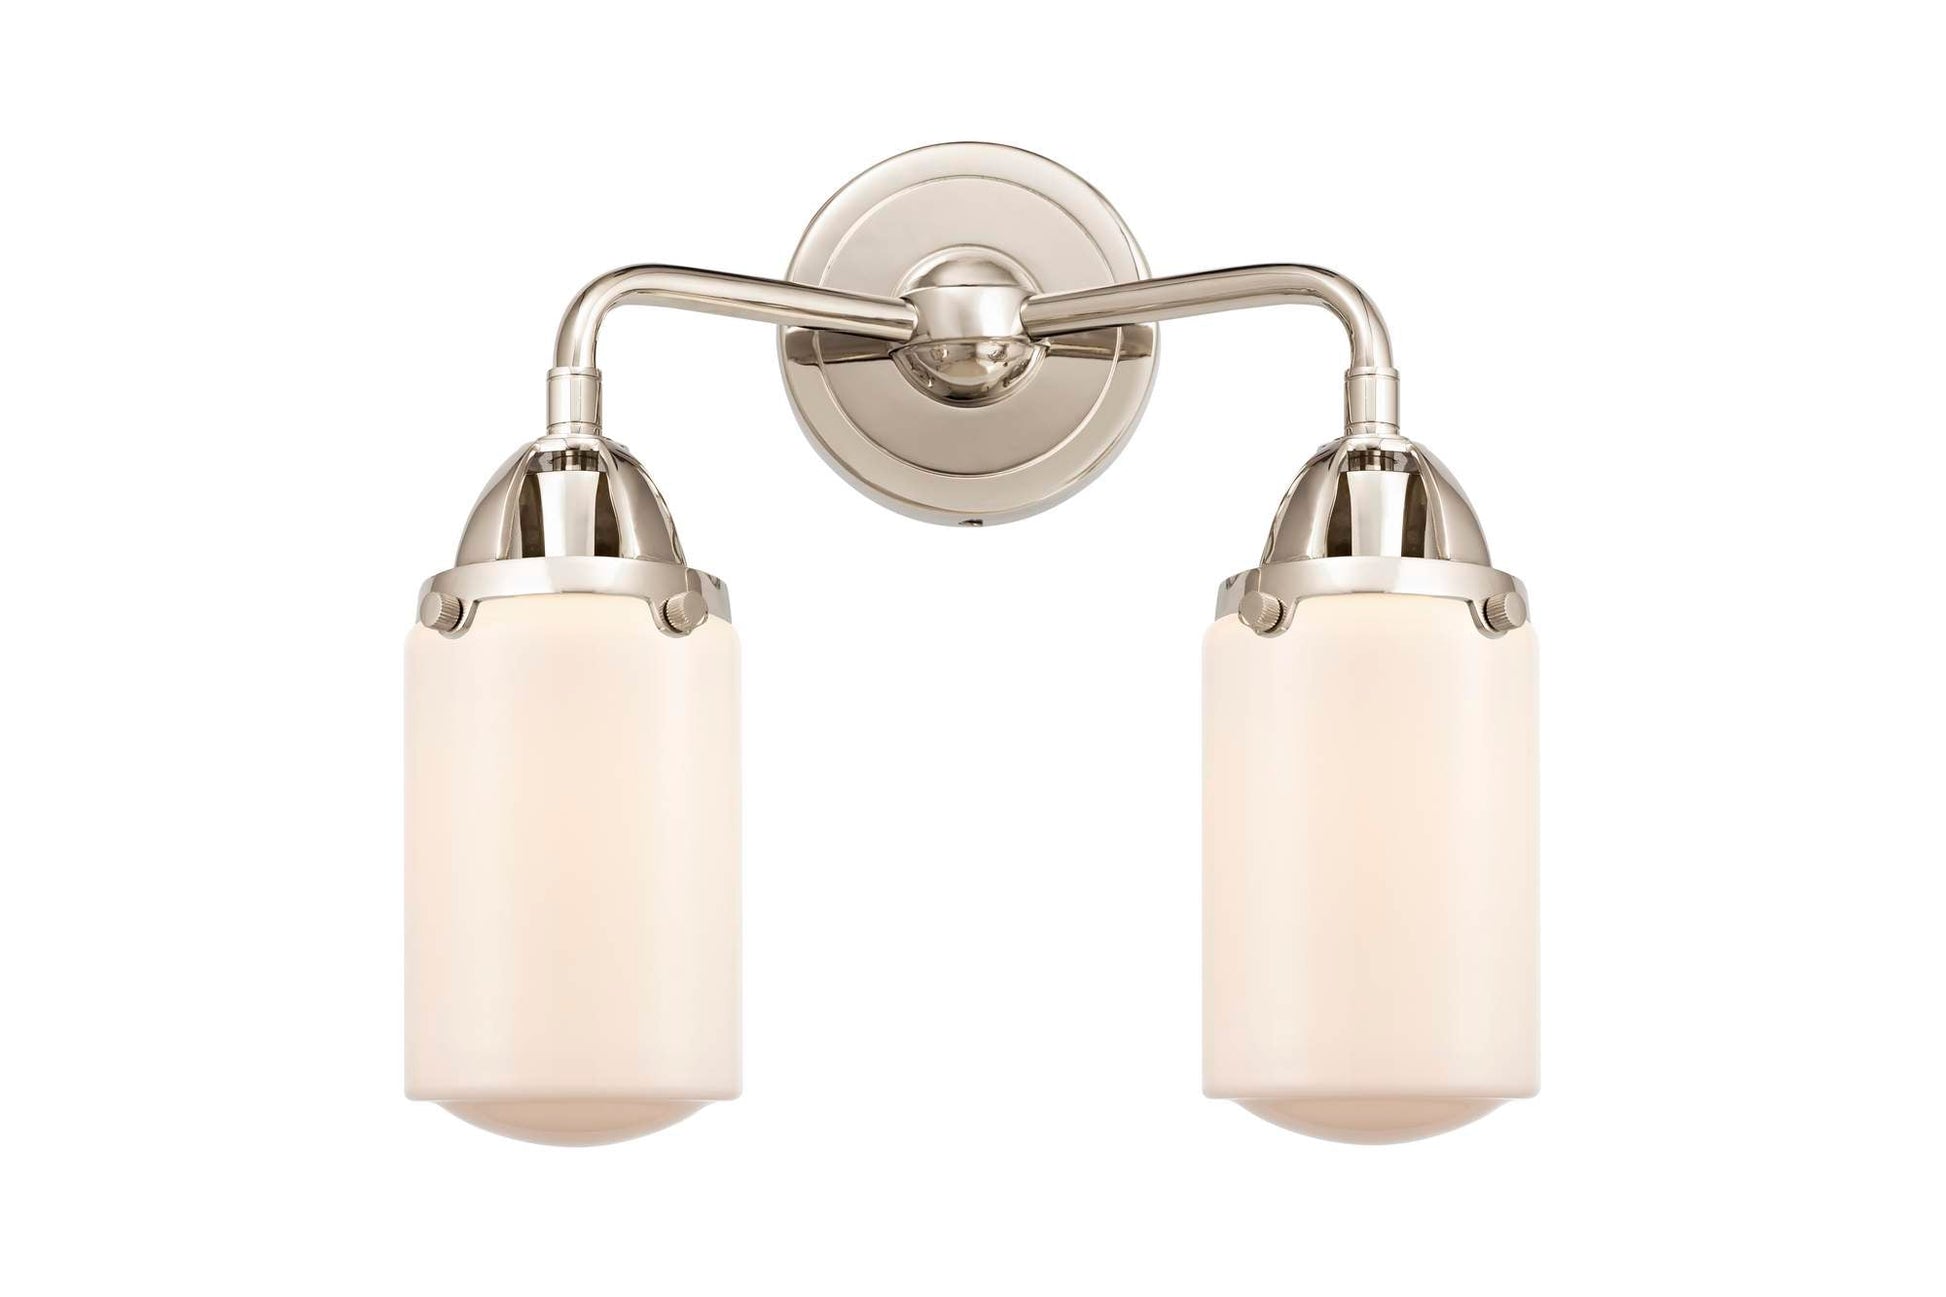 288-2W-PN-G311 2-Light 12.5" Polished Nickel Bath Vanity Light - Matte White Cased Dover Glass - LED Bulb - Dimmensions: 12.5 x 6.5 x 12.875 - Glass Up or Down: Yes